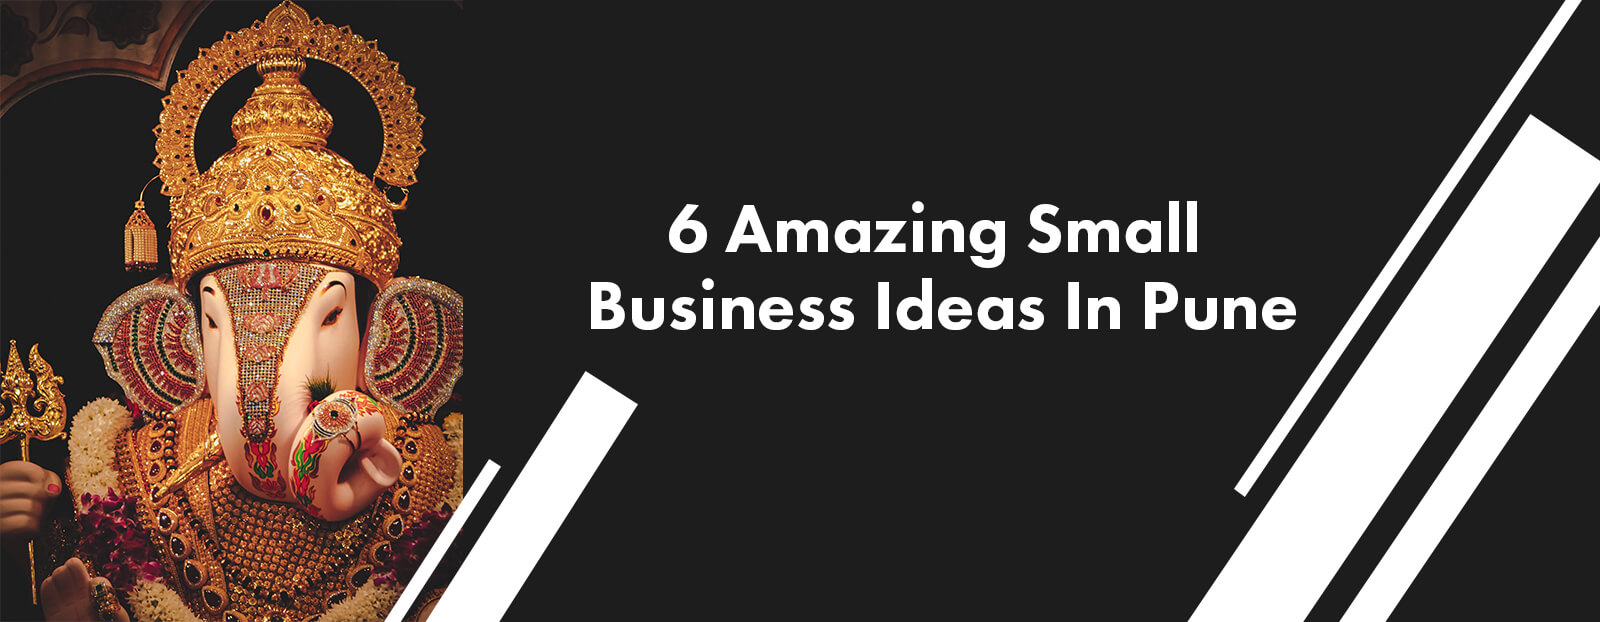 6 Amazing Small Business Ideas In Pune